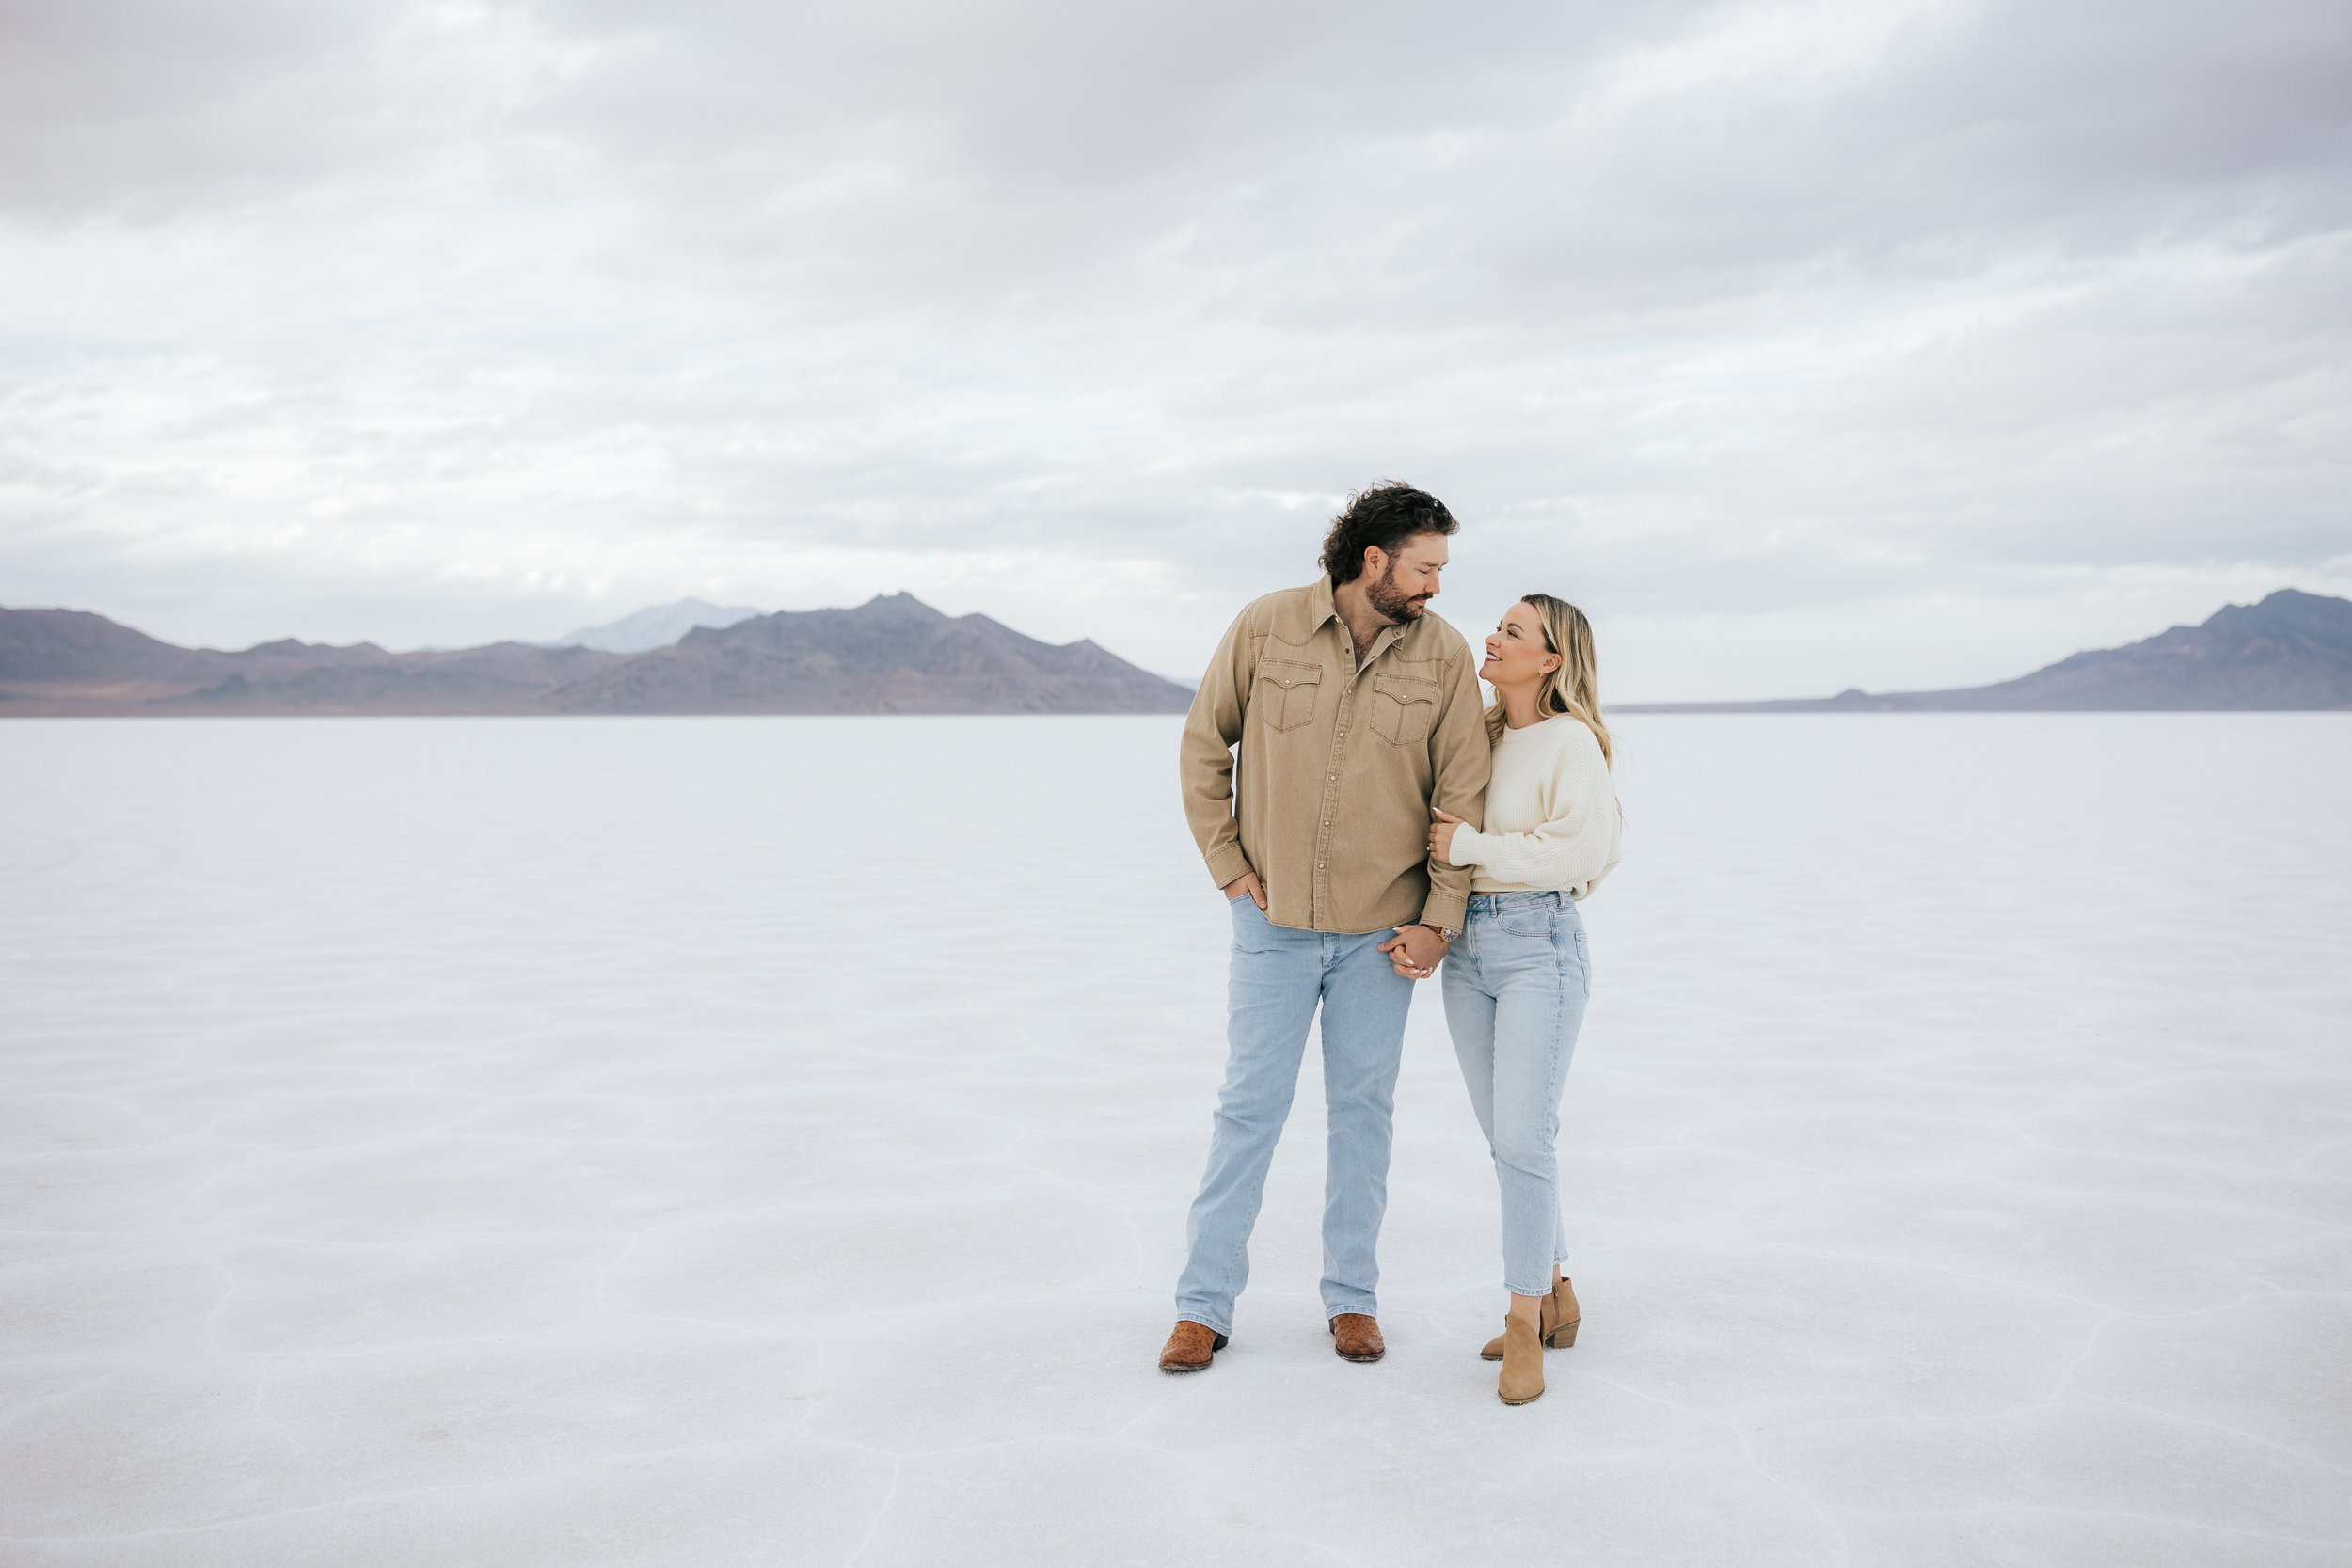  An engaged couple walks together while holding hands as they pose for a photo at the Bonneville Salt Flats near Wendover, Nevada and Salt Lake City, Utah. The Salt Flats are white and the sky is overcast. The mountains show behind. Engagement sessio